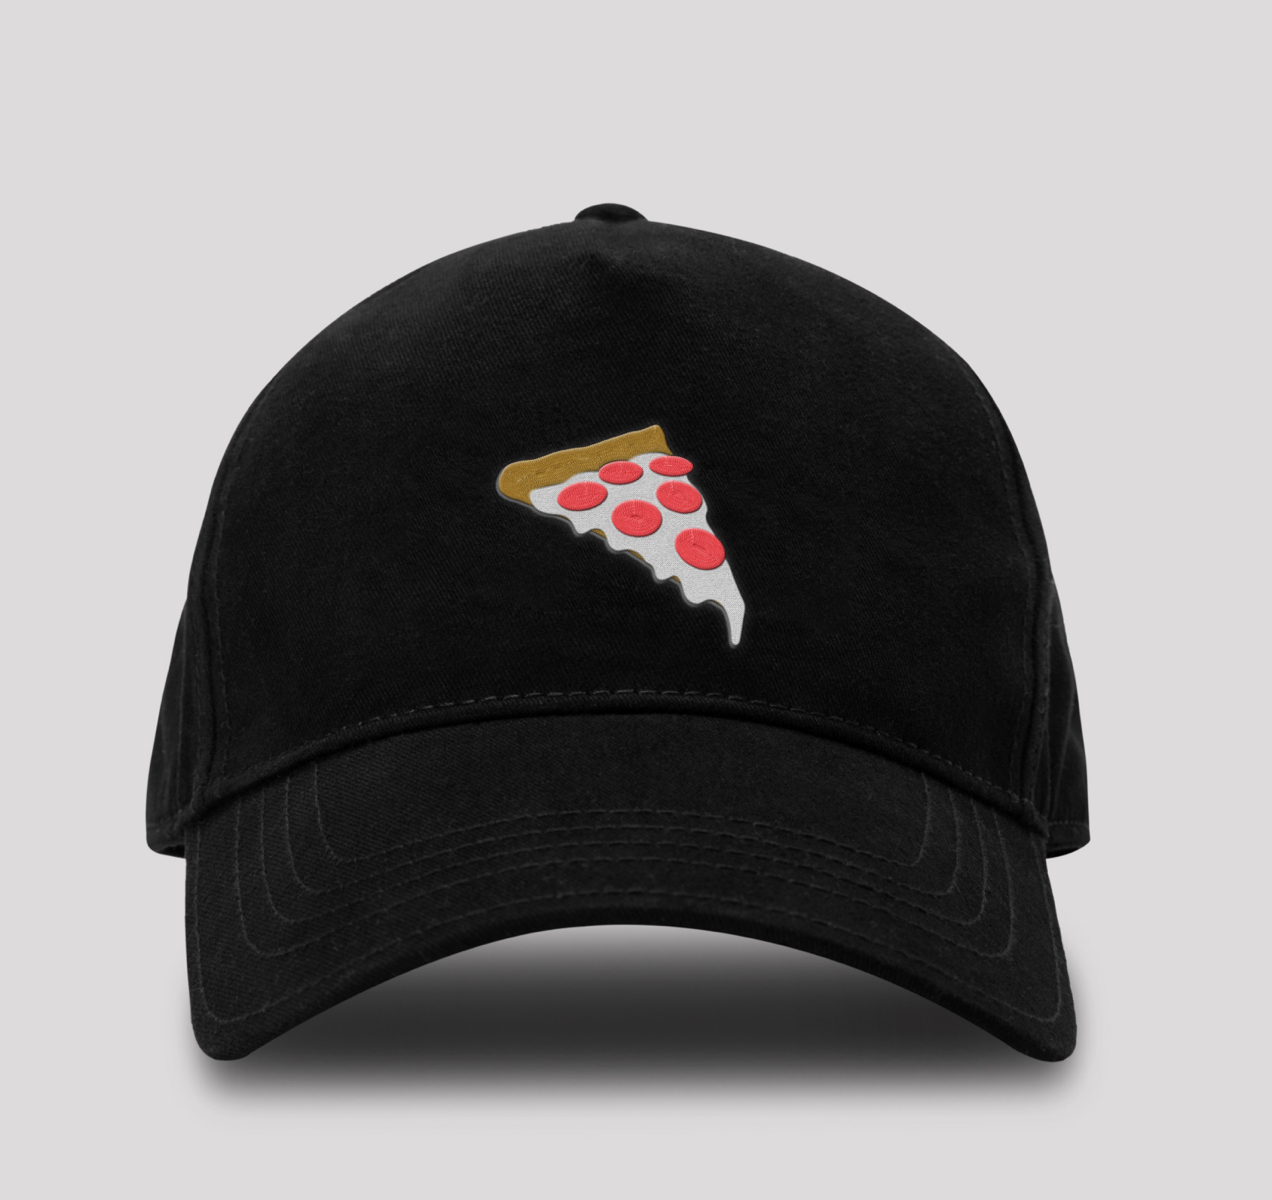 black hat with a pizza design